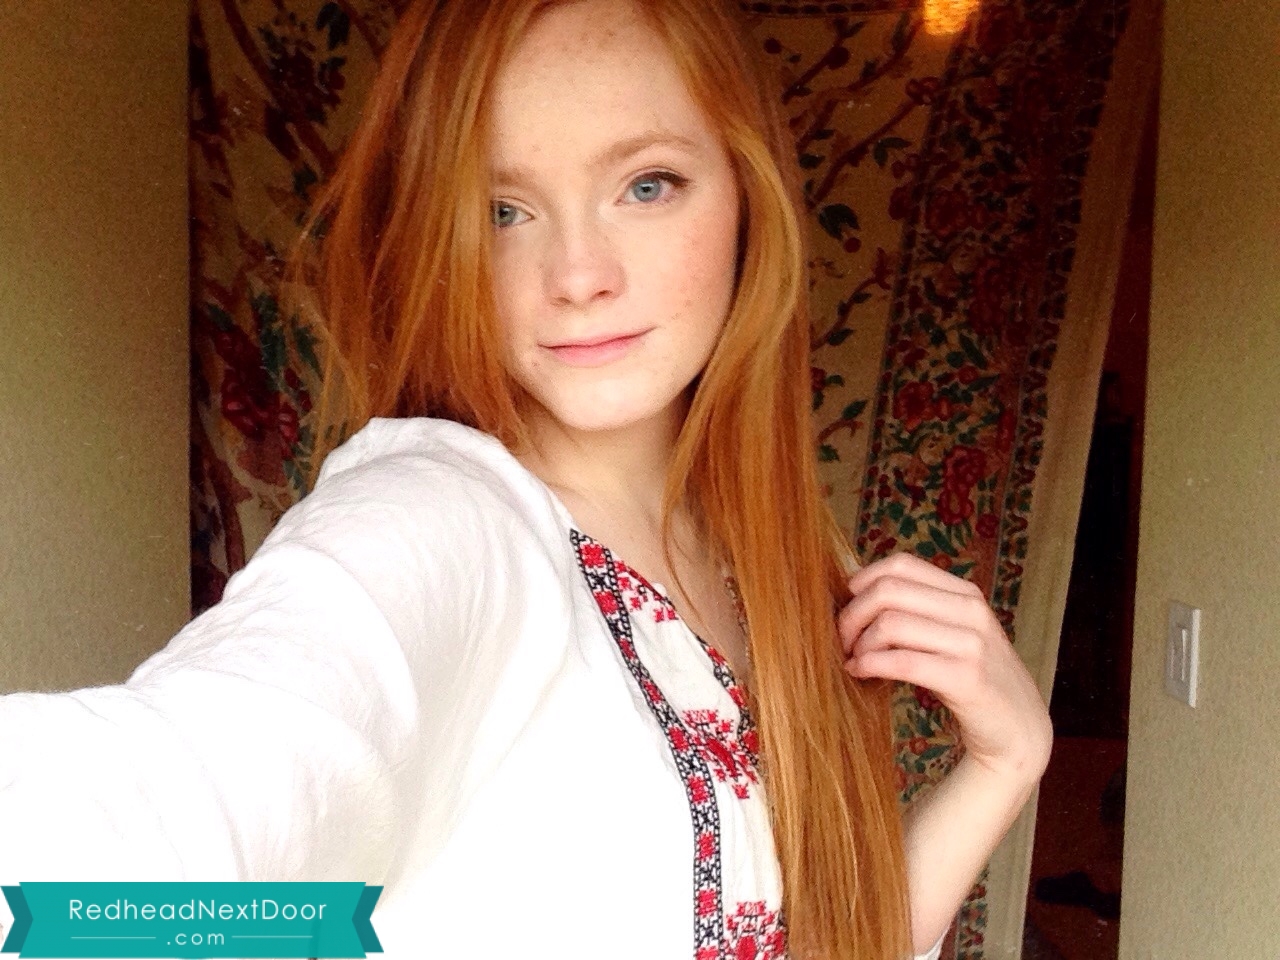 Cute Selfie Thank You For Sharing Redhead Next Door Photo Gallery